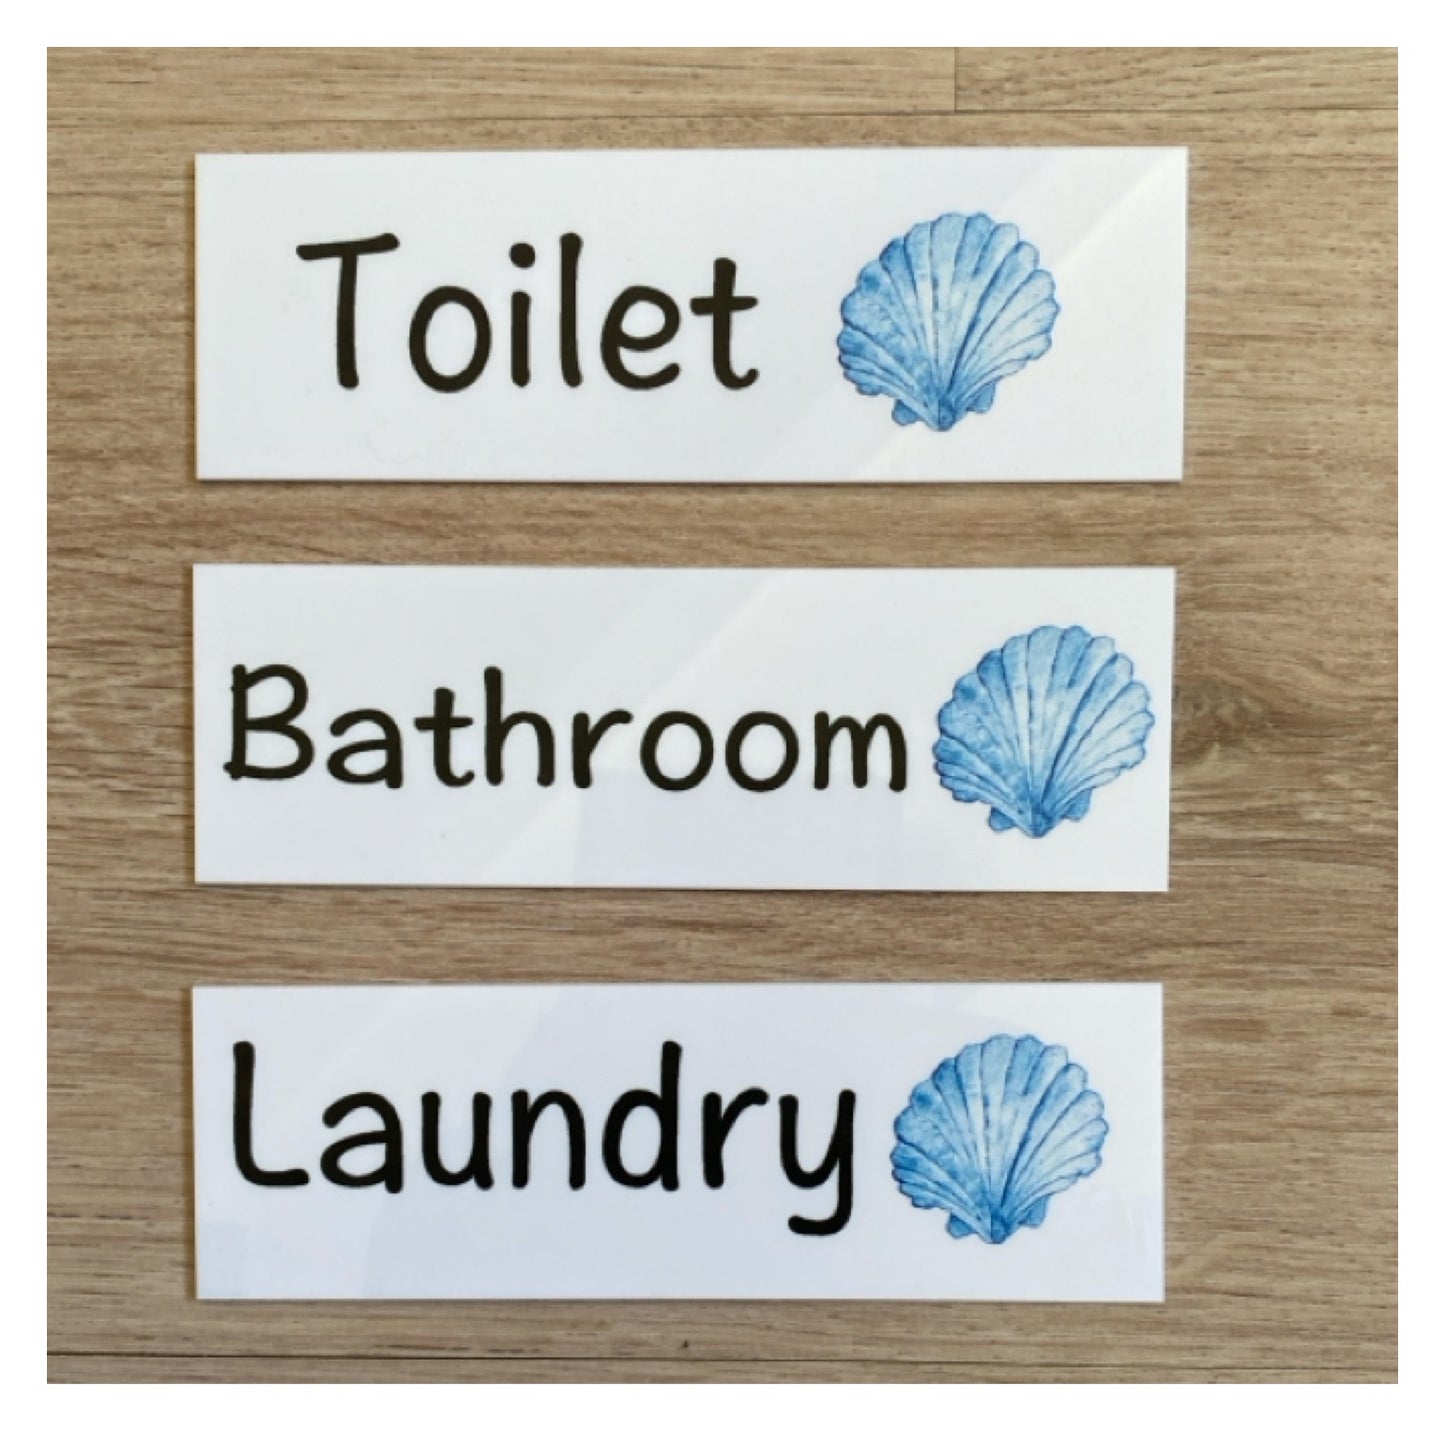 Shell Beach Blue Door Room Sign Toilet Laundry Bathroom - The Renmy Store Homewares & Gifts 